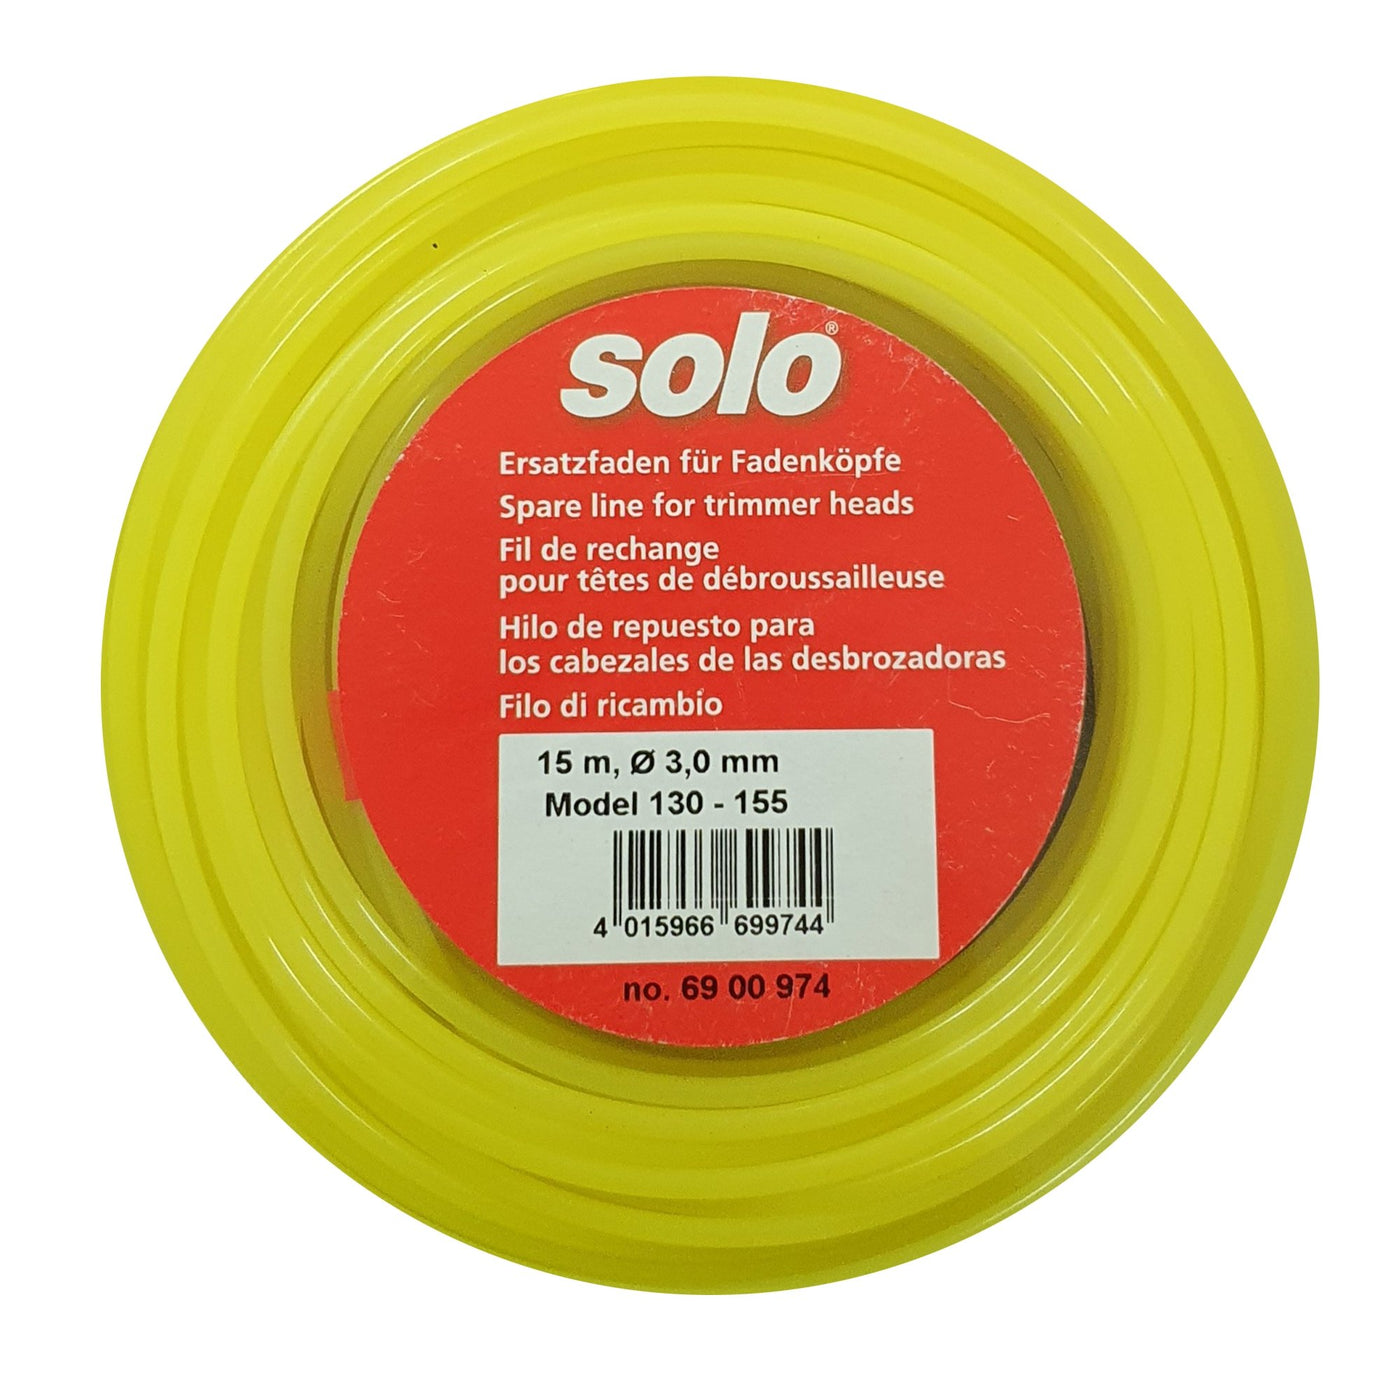 Replacement line 3.0mm round x 15m - Solo New Zealand